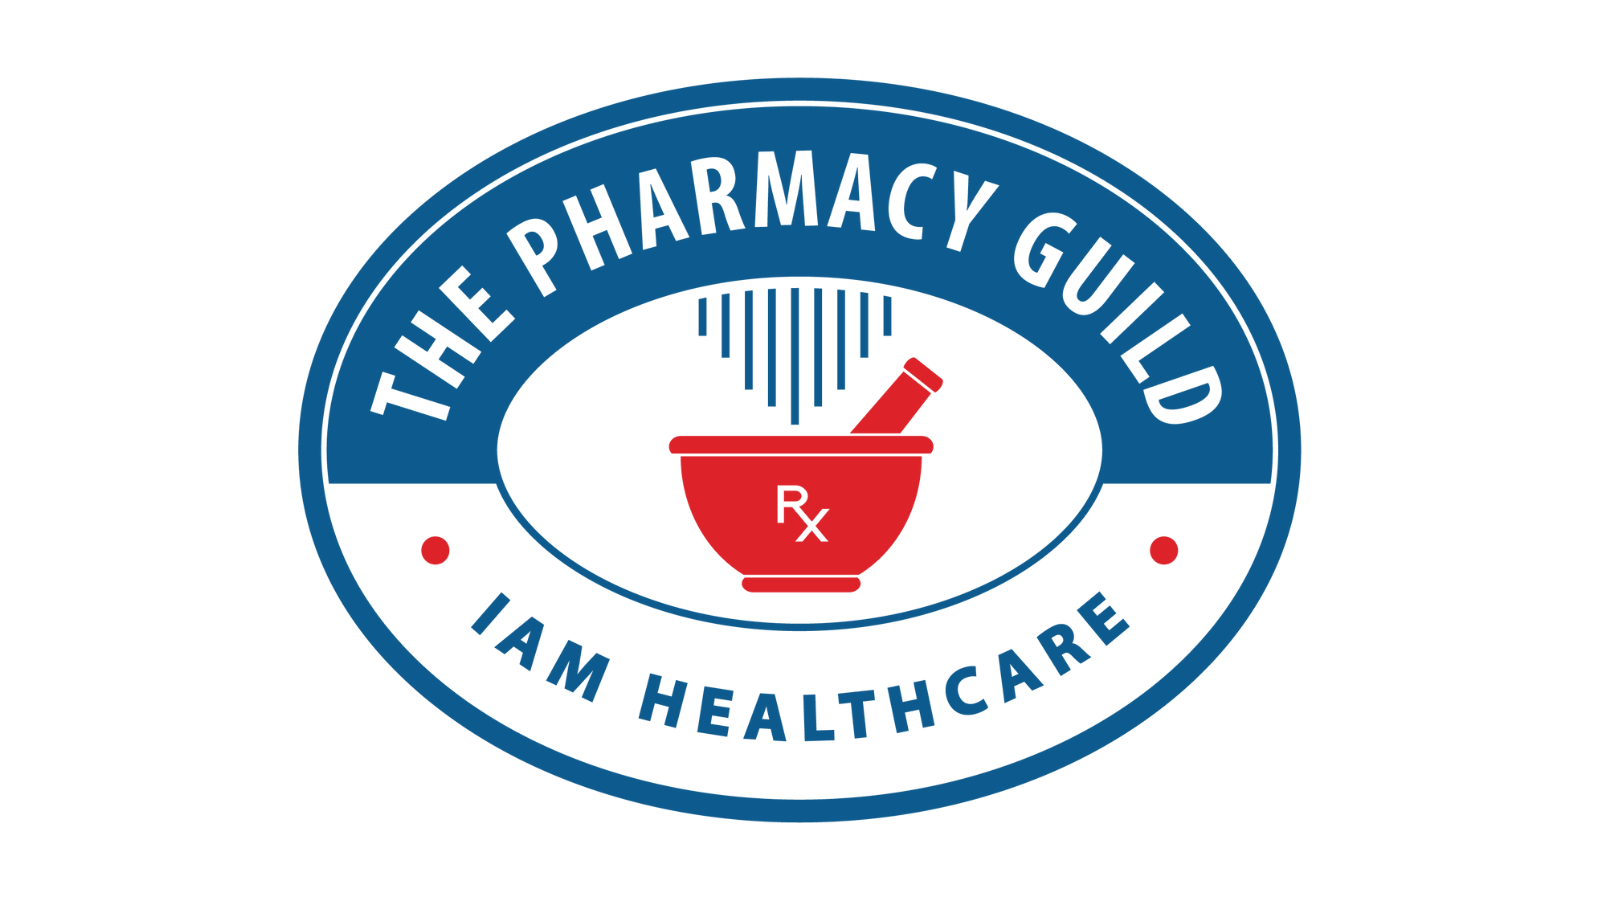 Pharmacy Professionals Uniting to Launch The Pharmacy Guild